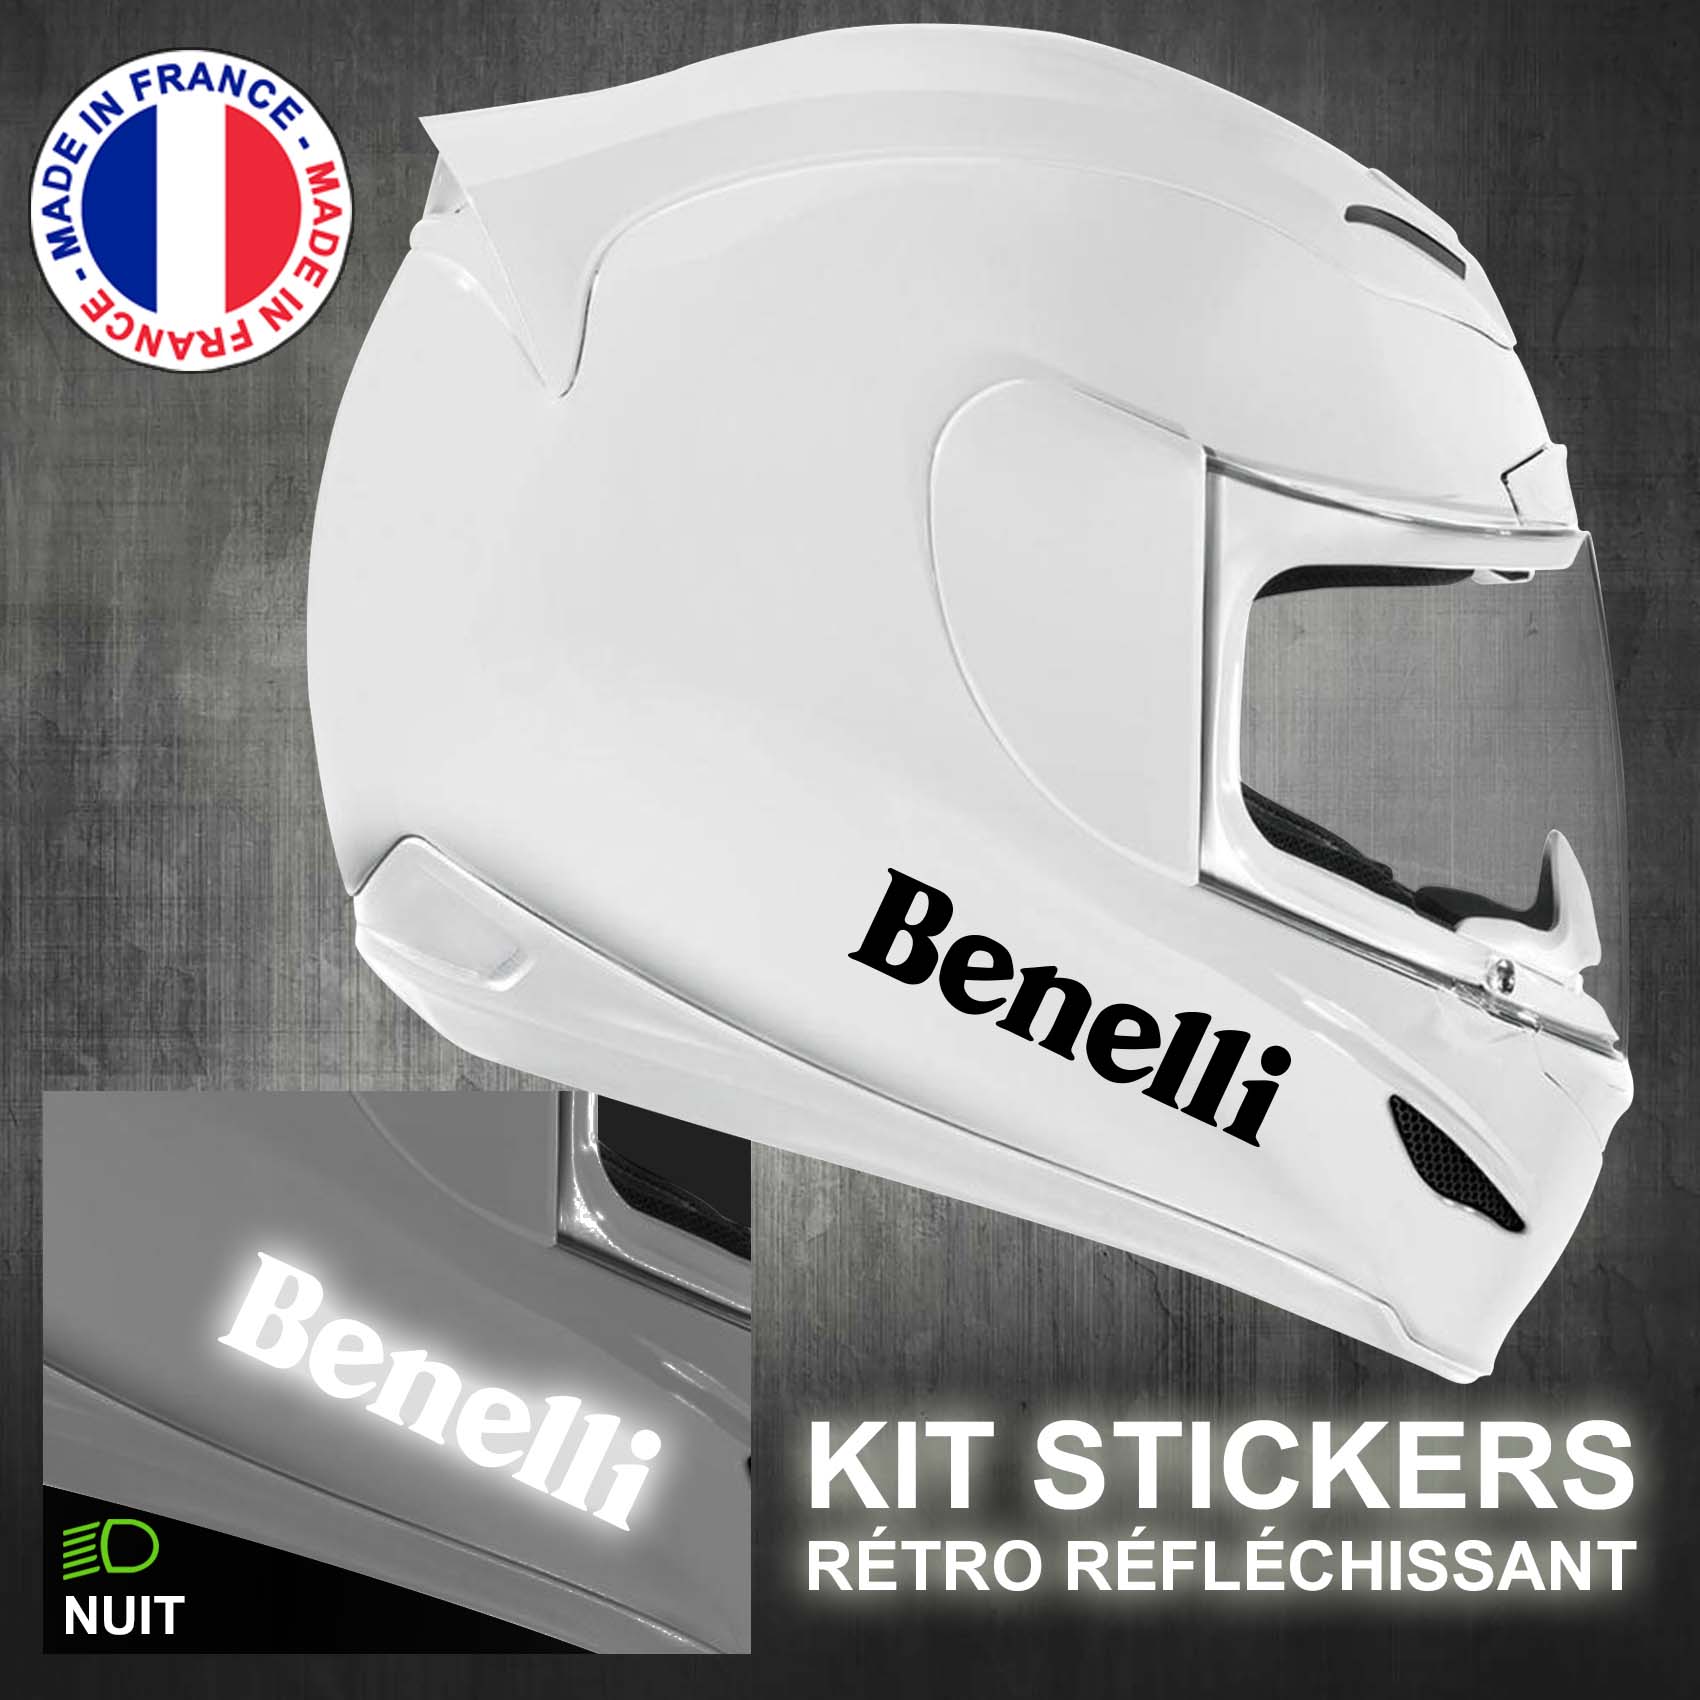 stickers-casque-moto-benelli-ref1-retro-reflechissant-autocollant-moto-velo-tuning-racing-route-sticker-casques-adhesif-scooter-nuit-securite-decals-personnalise-personnalisable-min